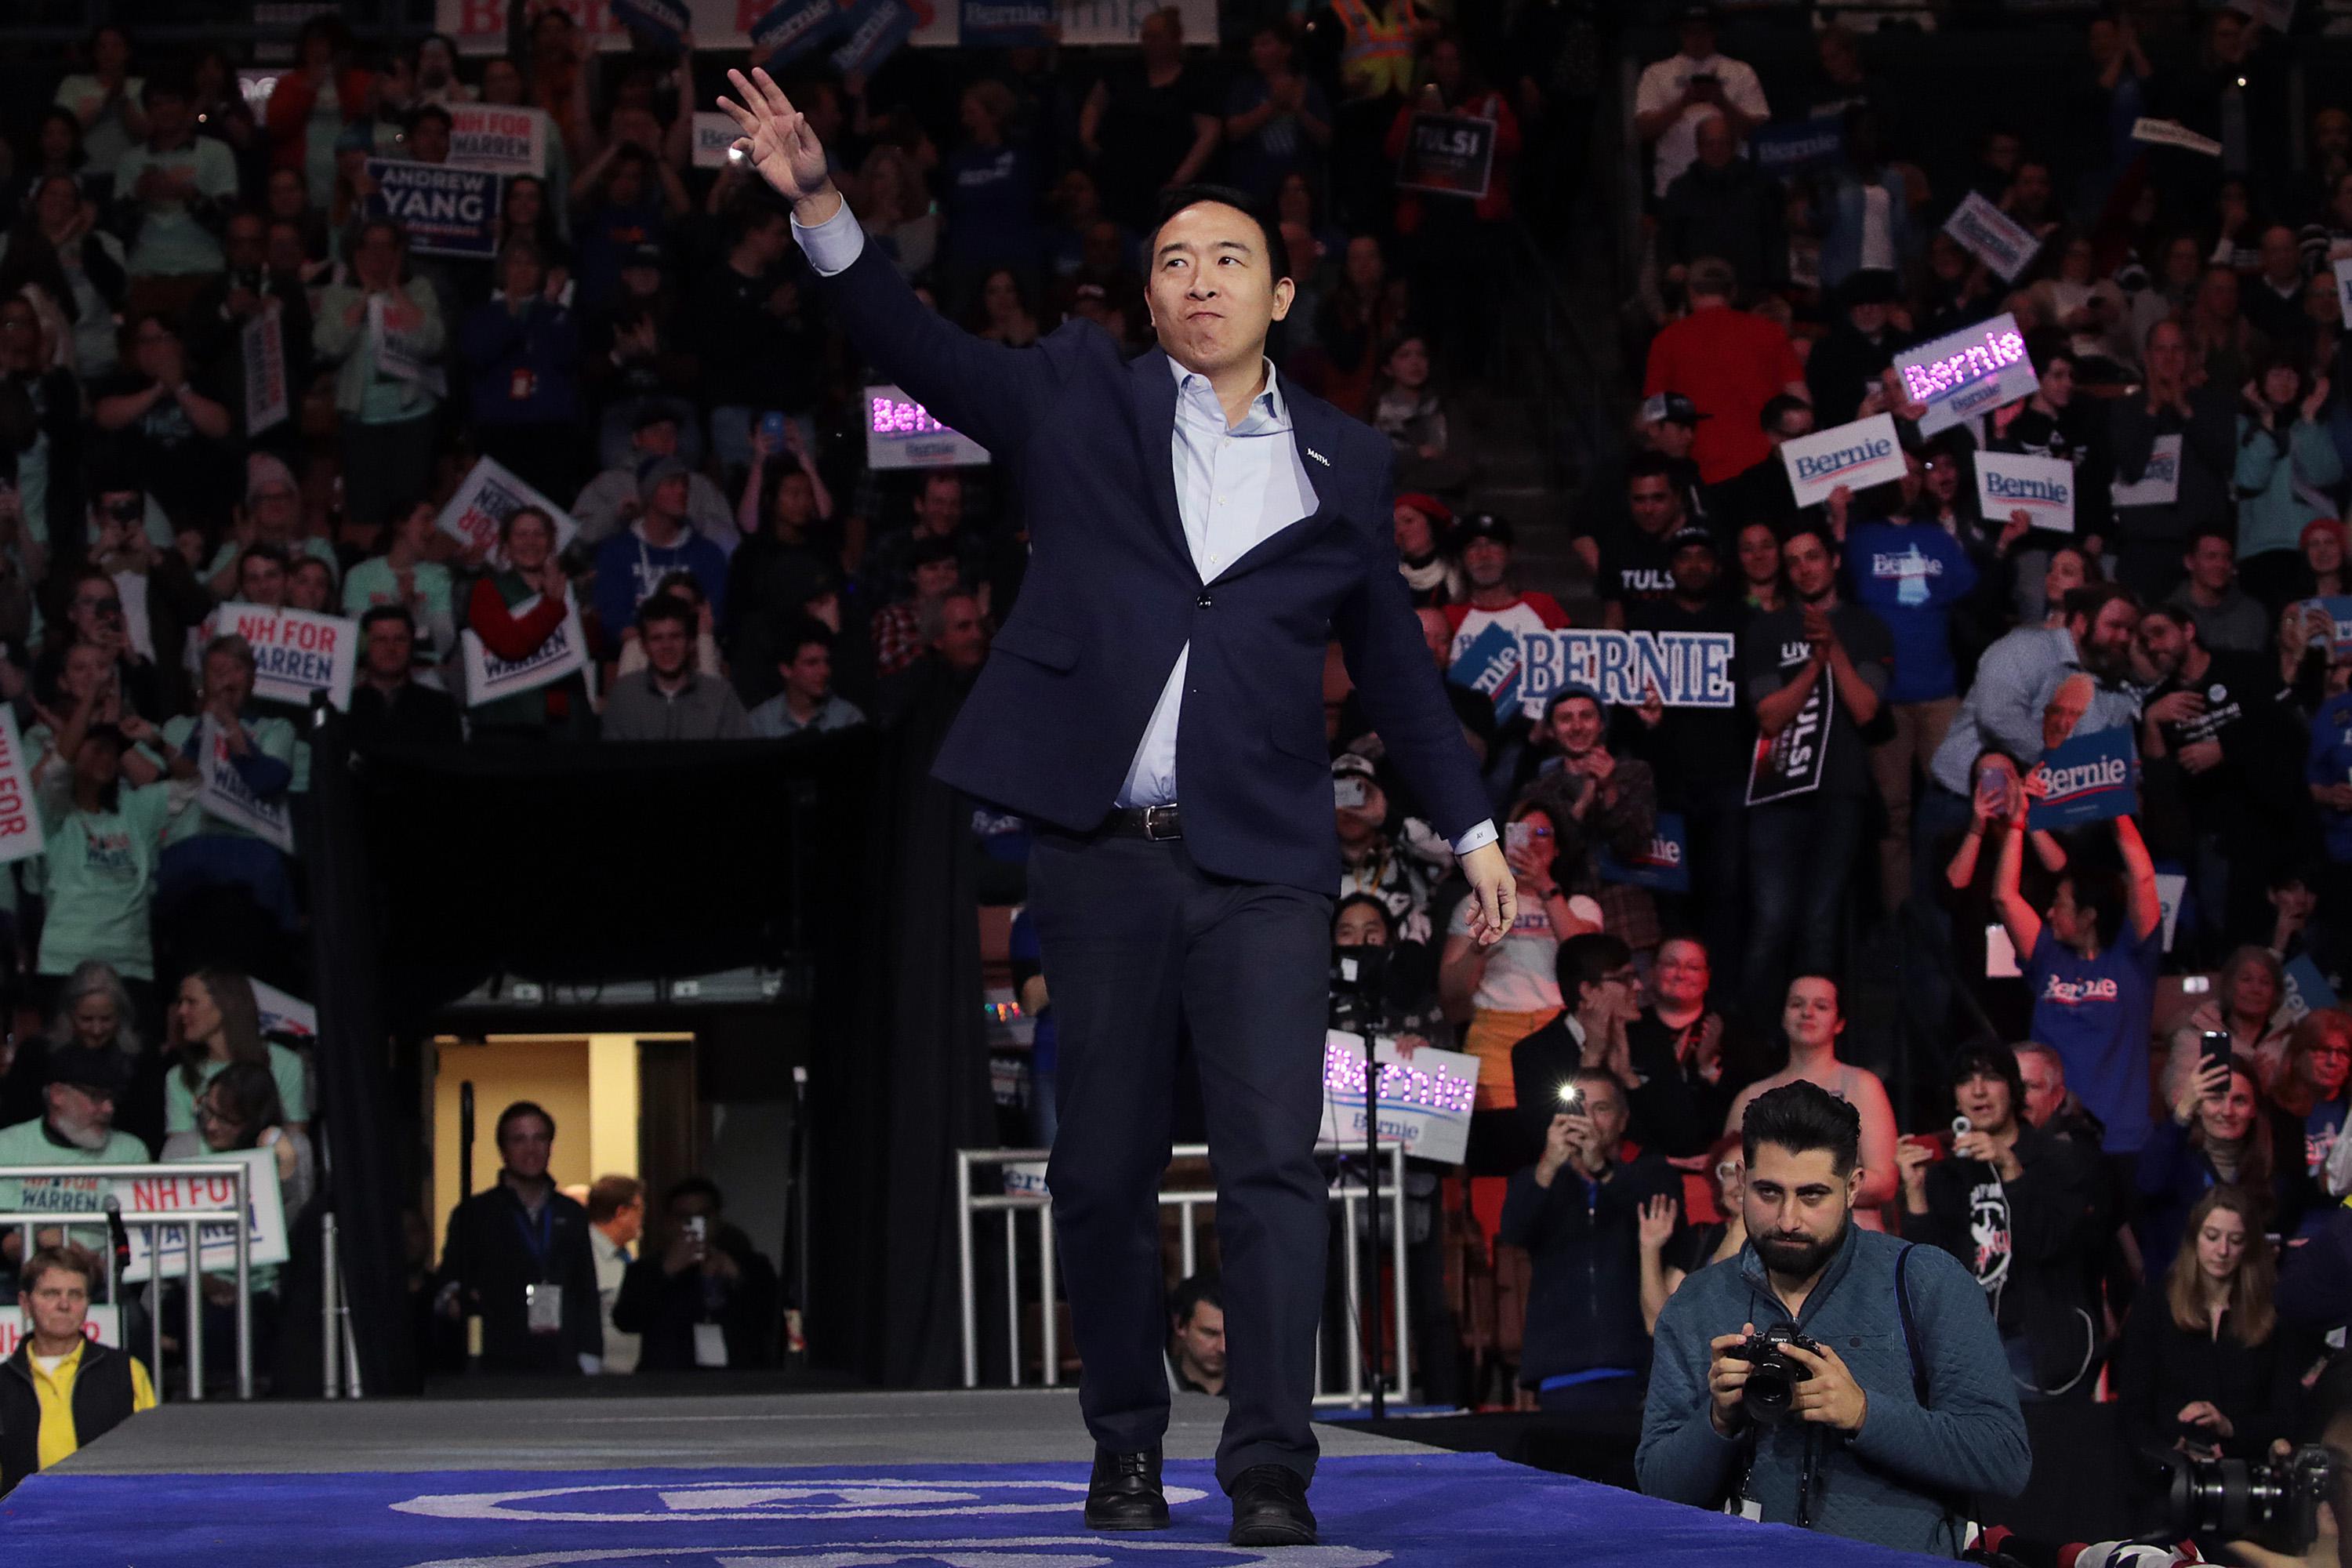 Democratic presidential candidate Andrew Yang on stage waving to a crowd.